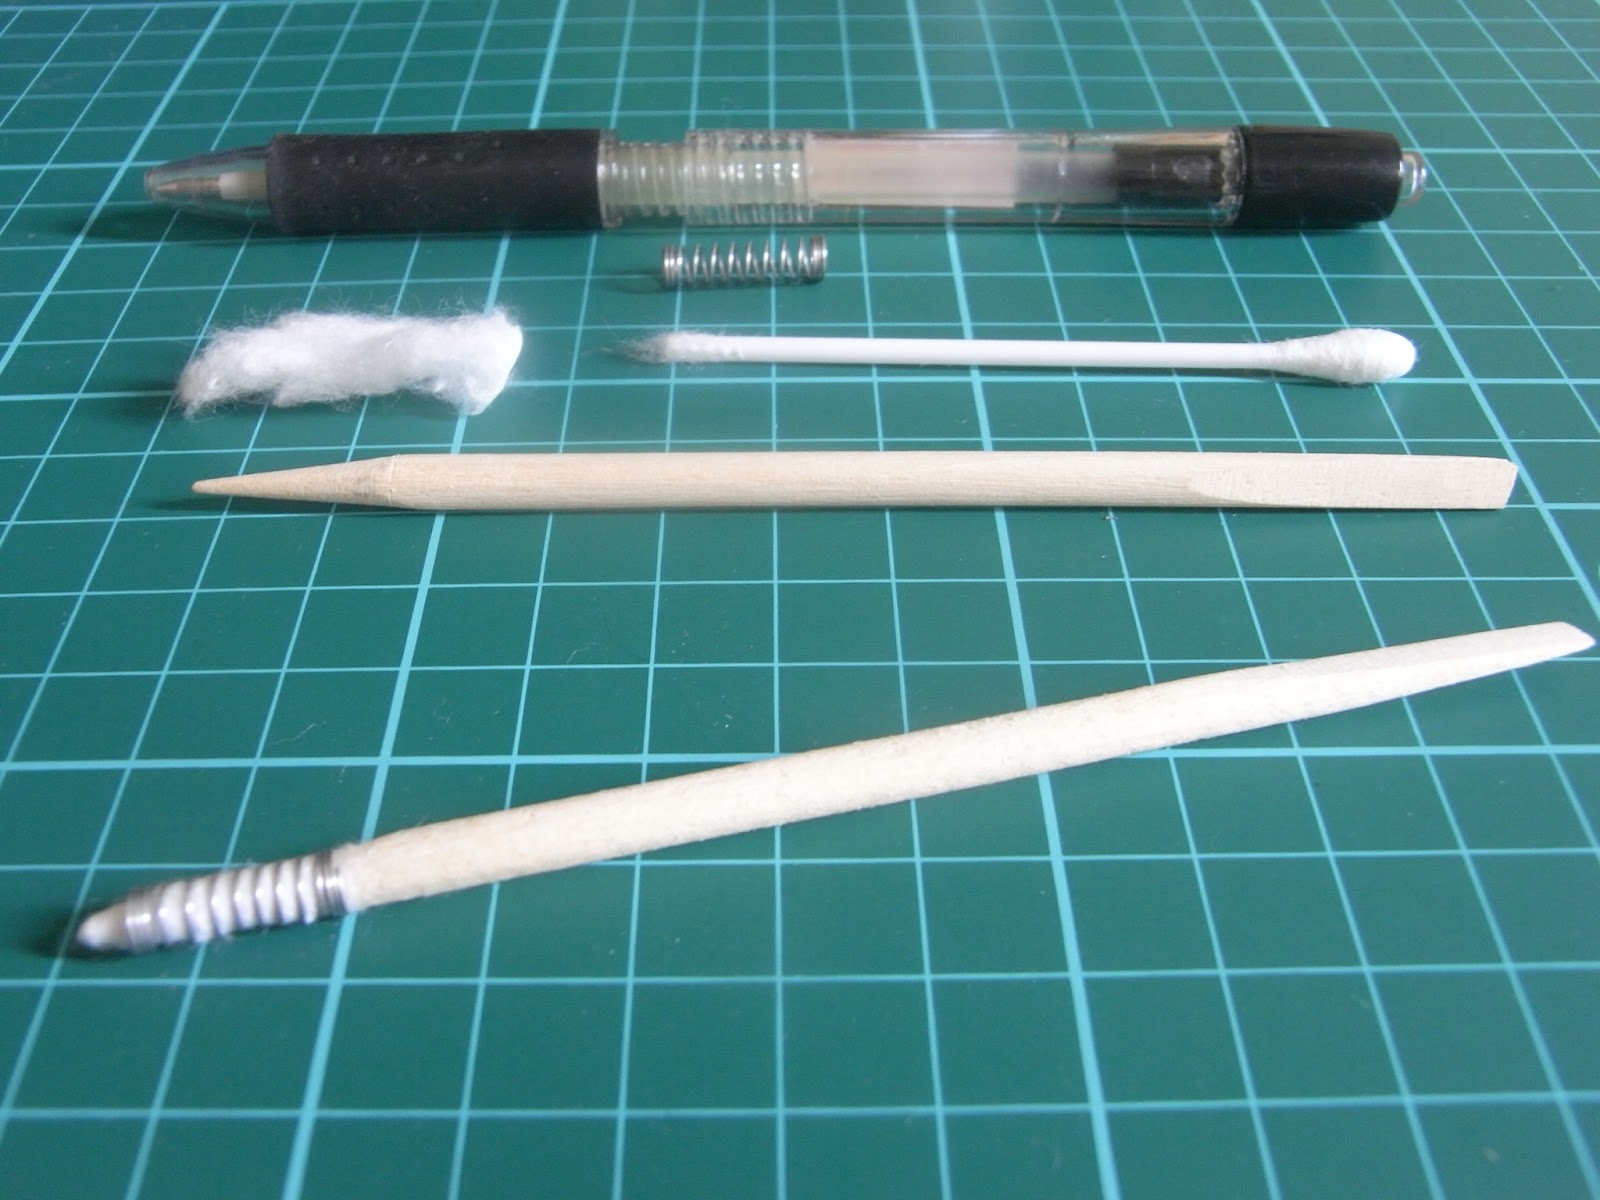 How to Make a Stylus With a Few Household Supplies